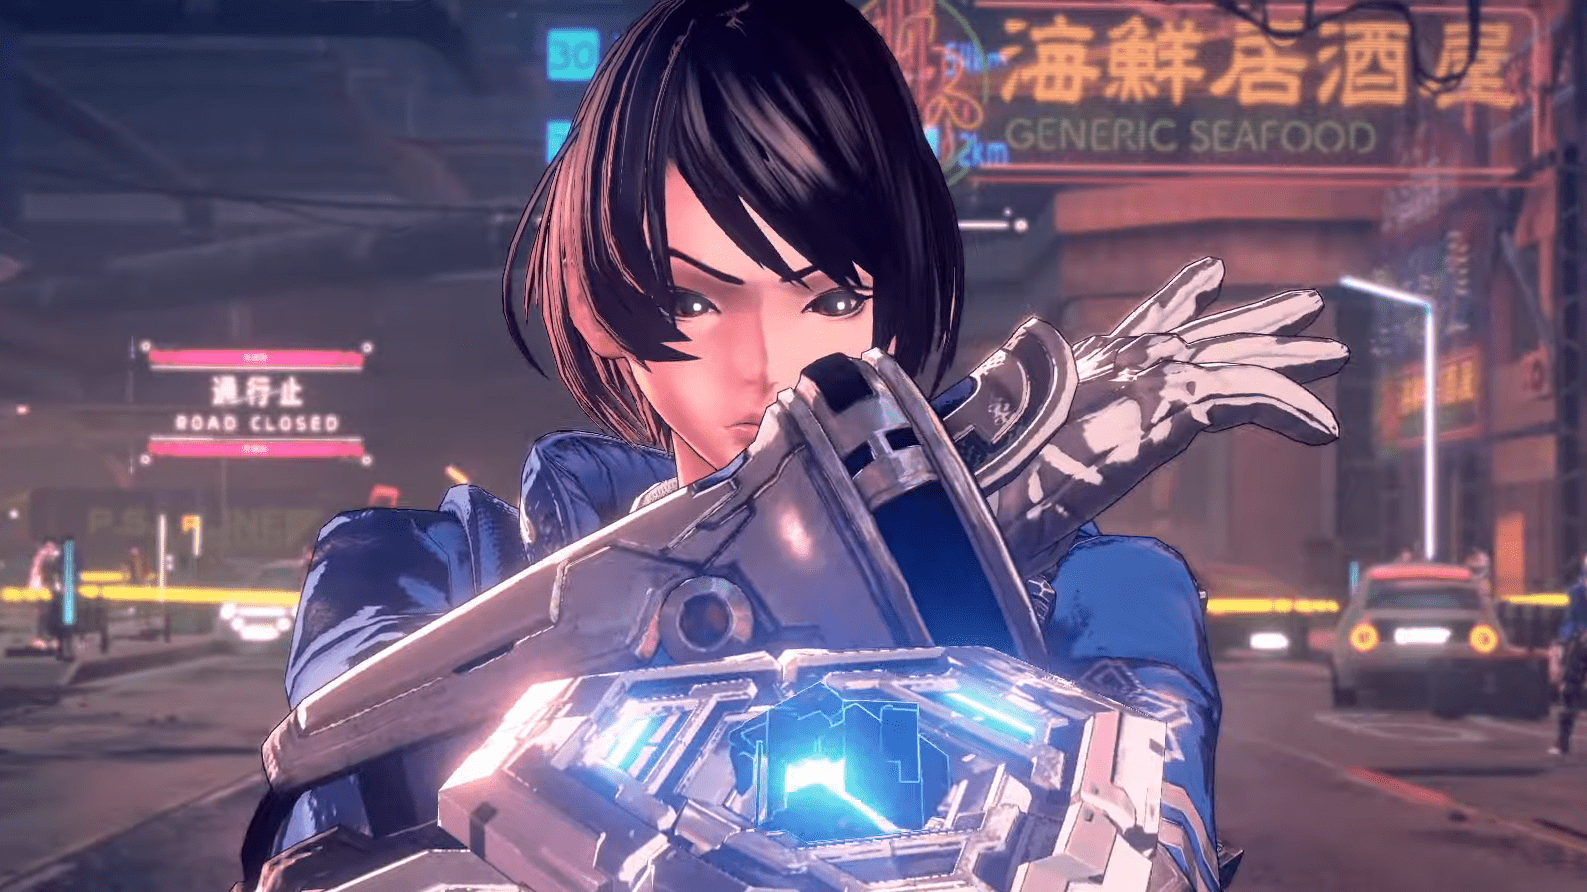 Check Out The Lengthy New English Trailer For The Upcoming Switch Exclusive, Astral Chain